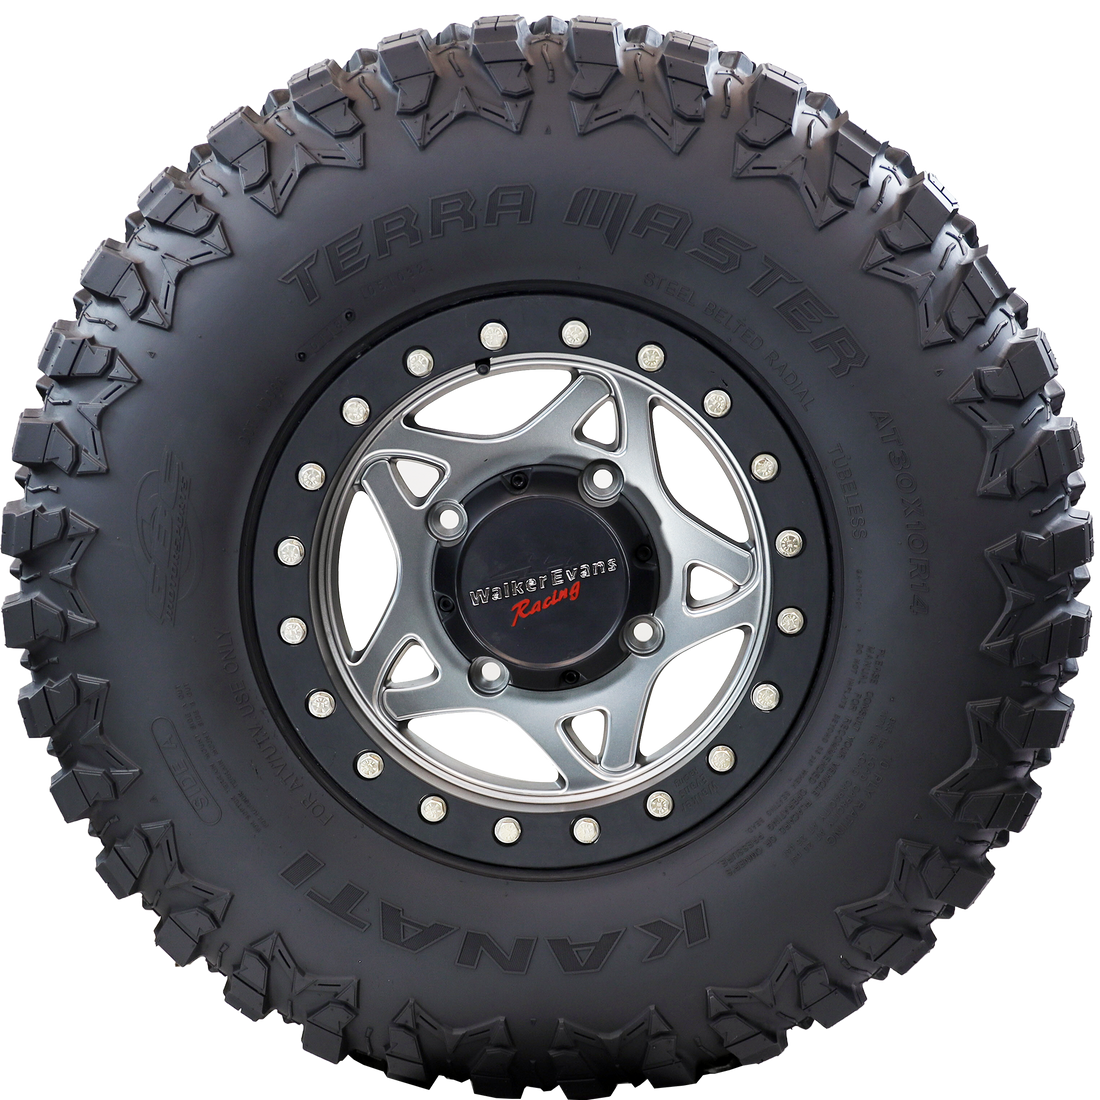 Side view of Terra Master ATV/UTV tire, providing a clear image of the durable sidewall and aggressive shoulder lugs. These design elements offer excellent stability and control on challenging off-road surfaces